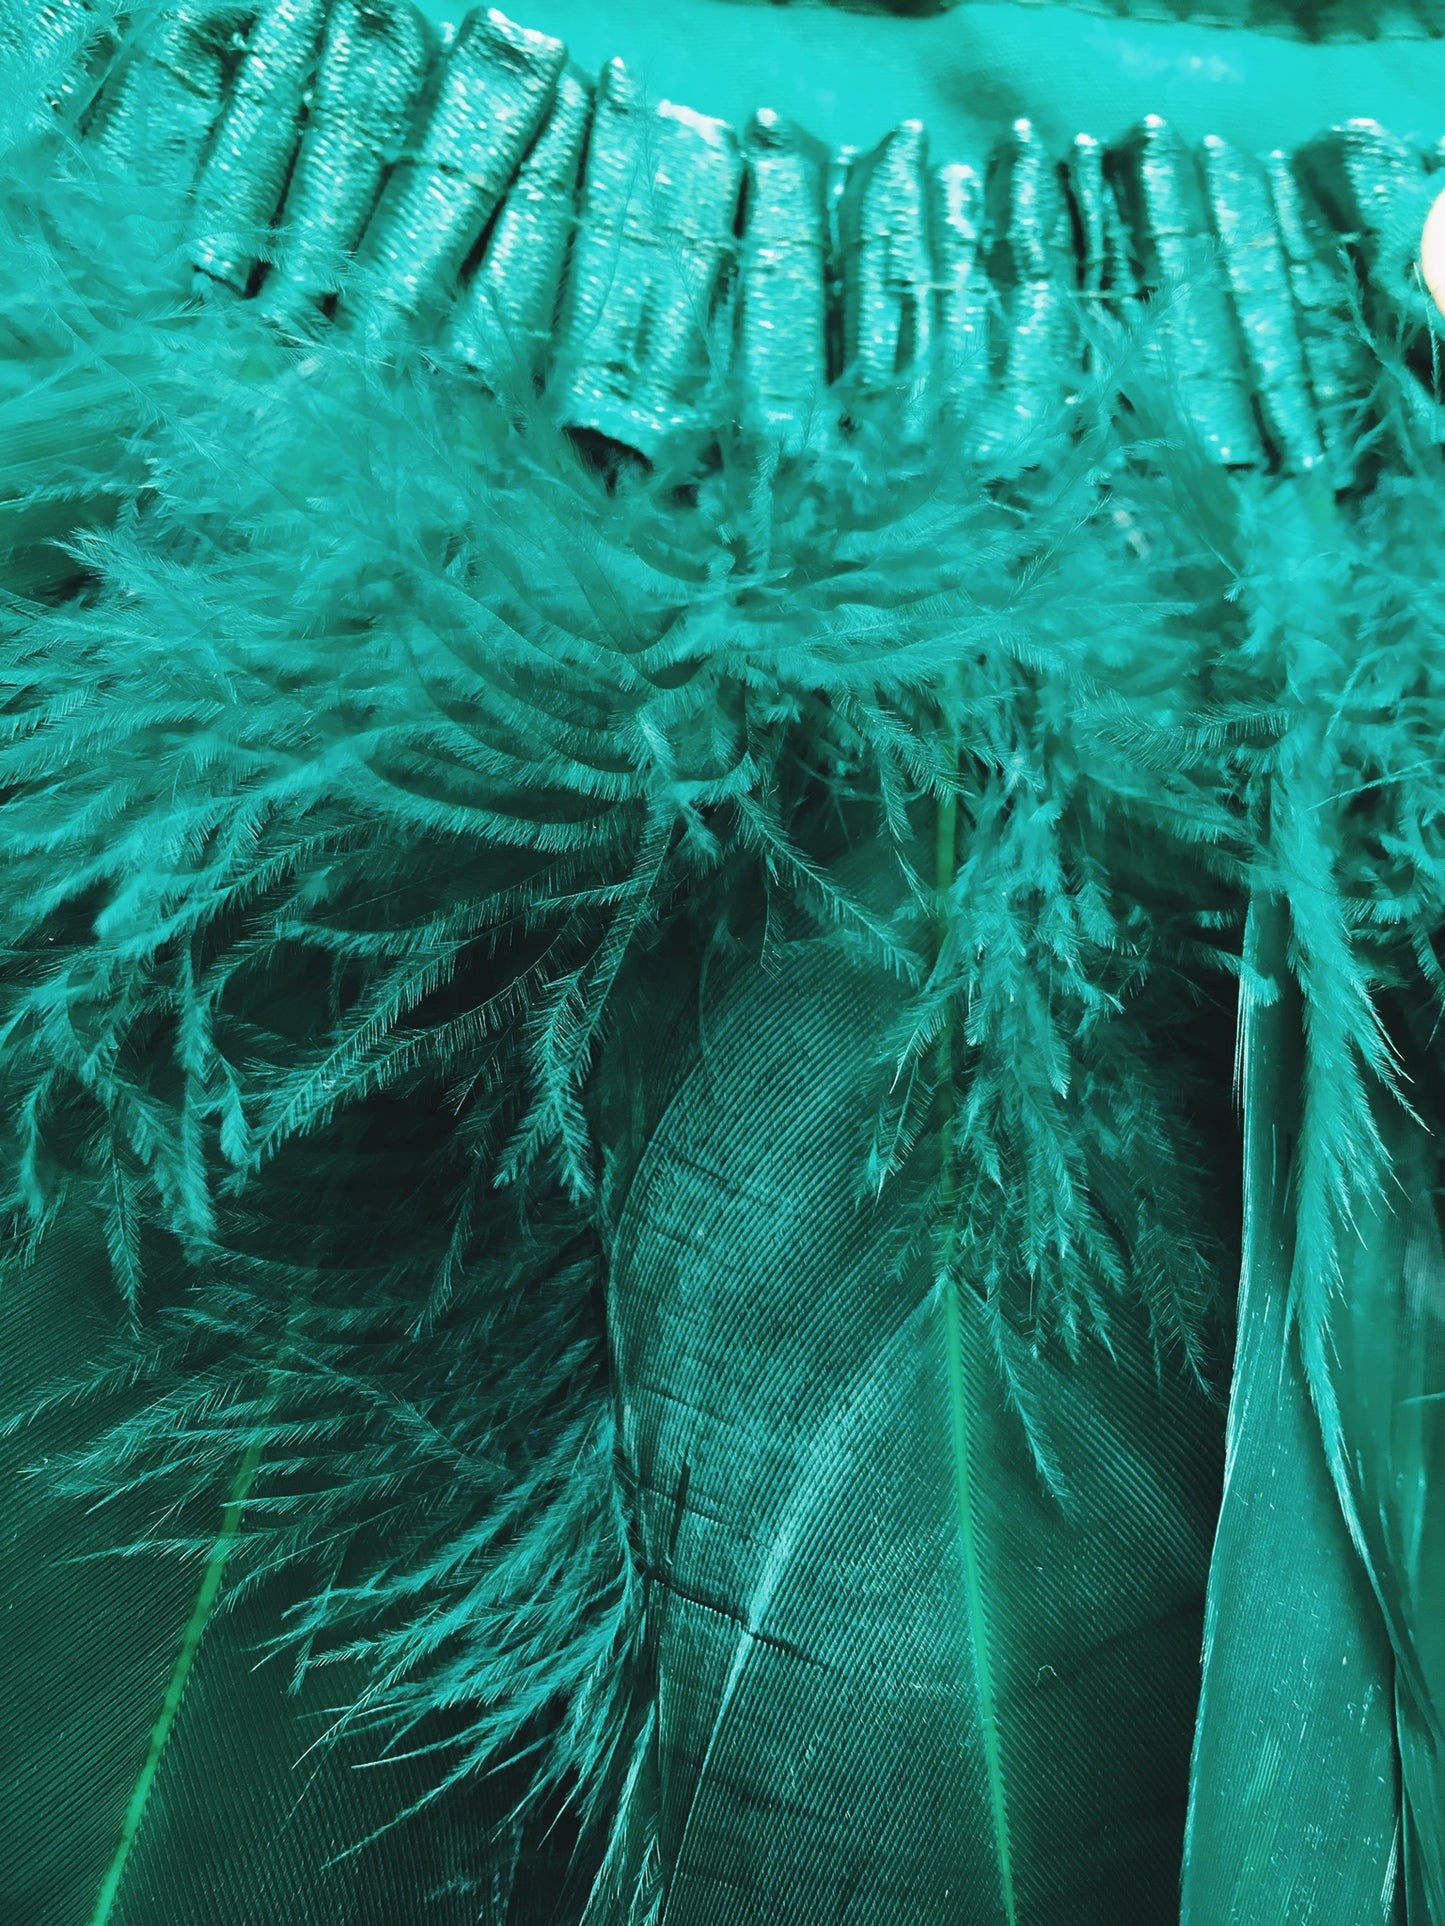 close-up of emerald green feathers